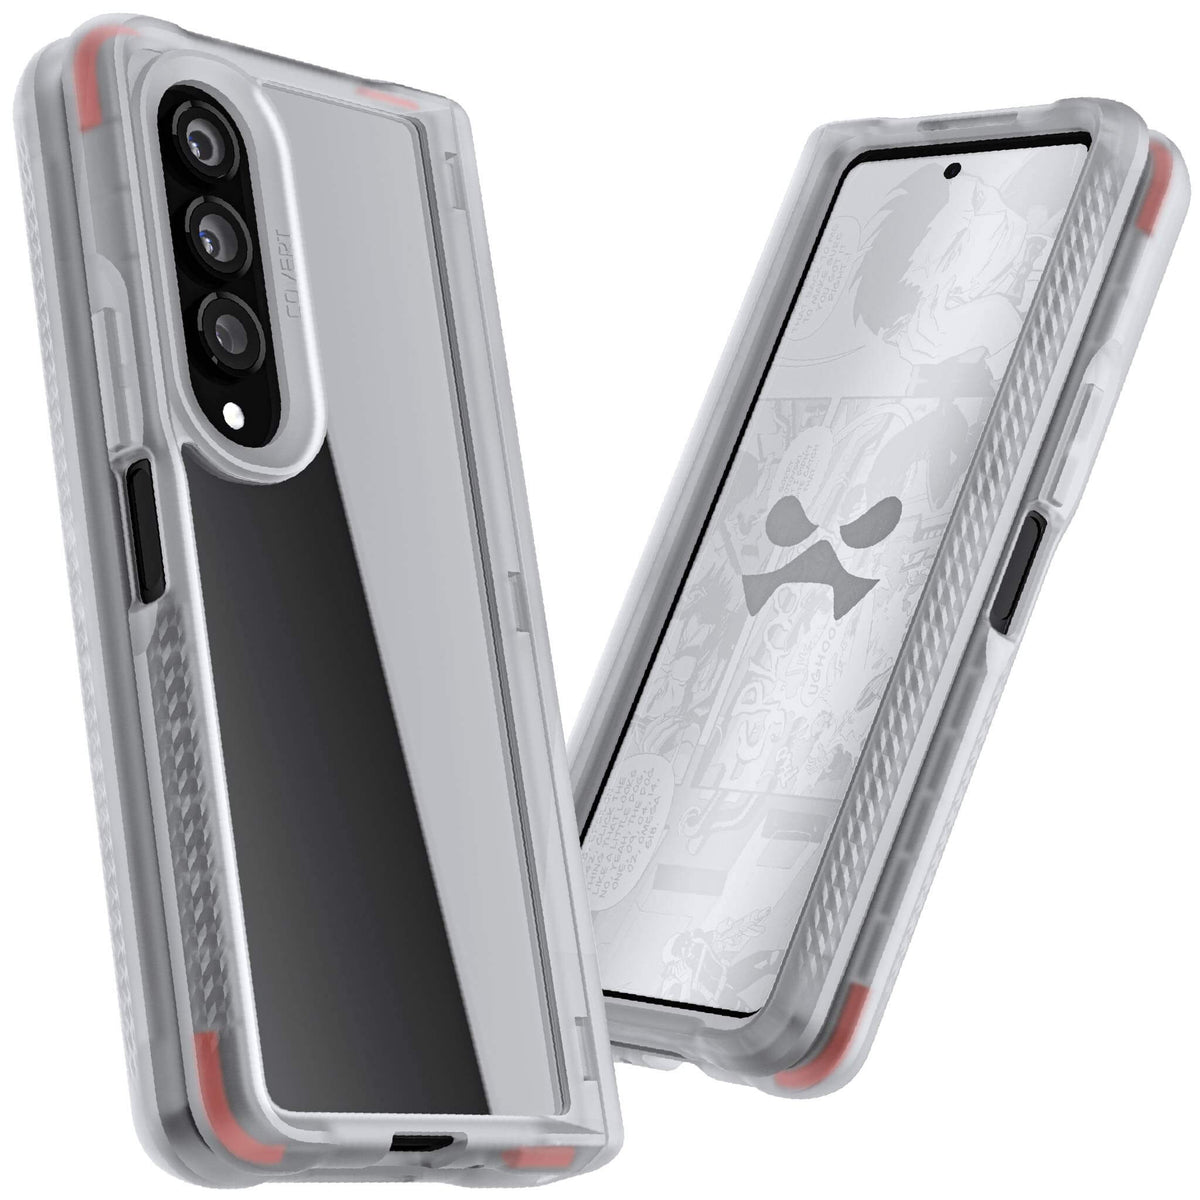 Ghostek Galaxy Fold 4 Protective Clear Shockproof Case — Covert Galaxy Z Fold 4 / Cloudy Gray